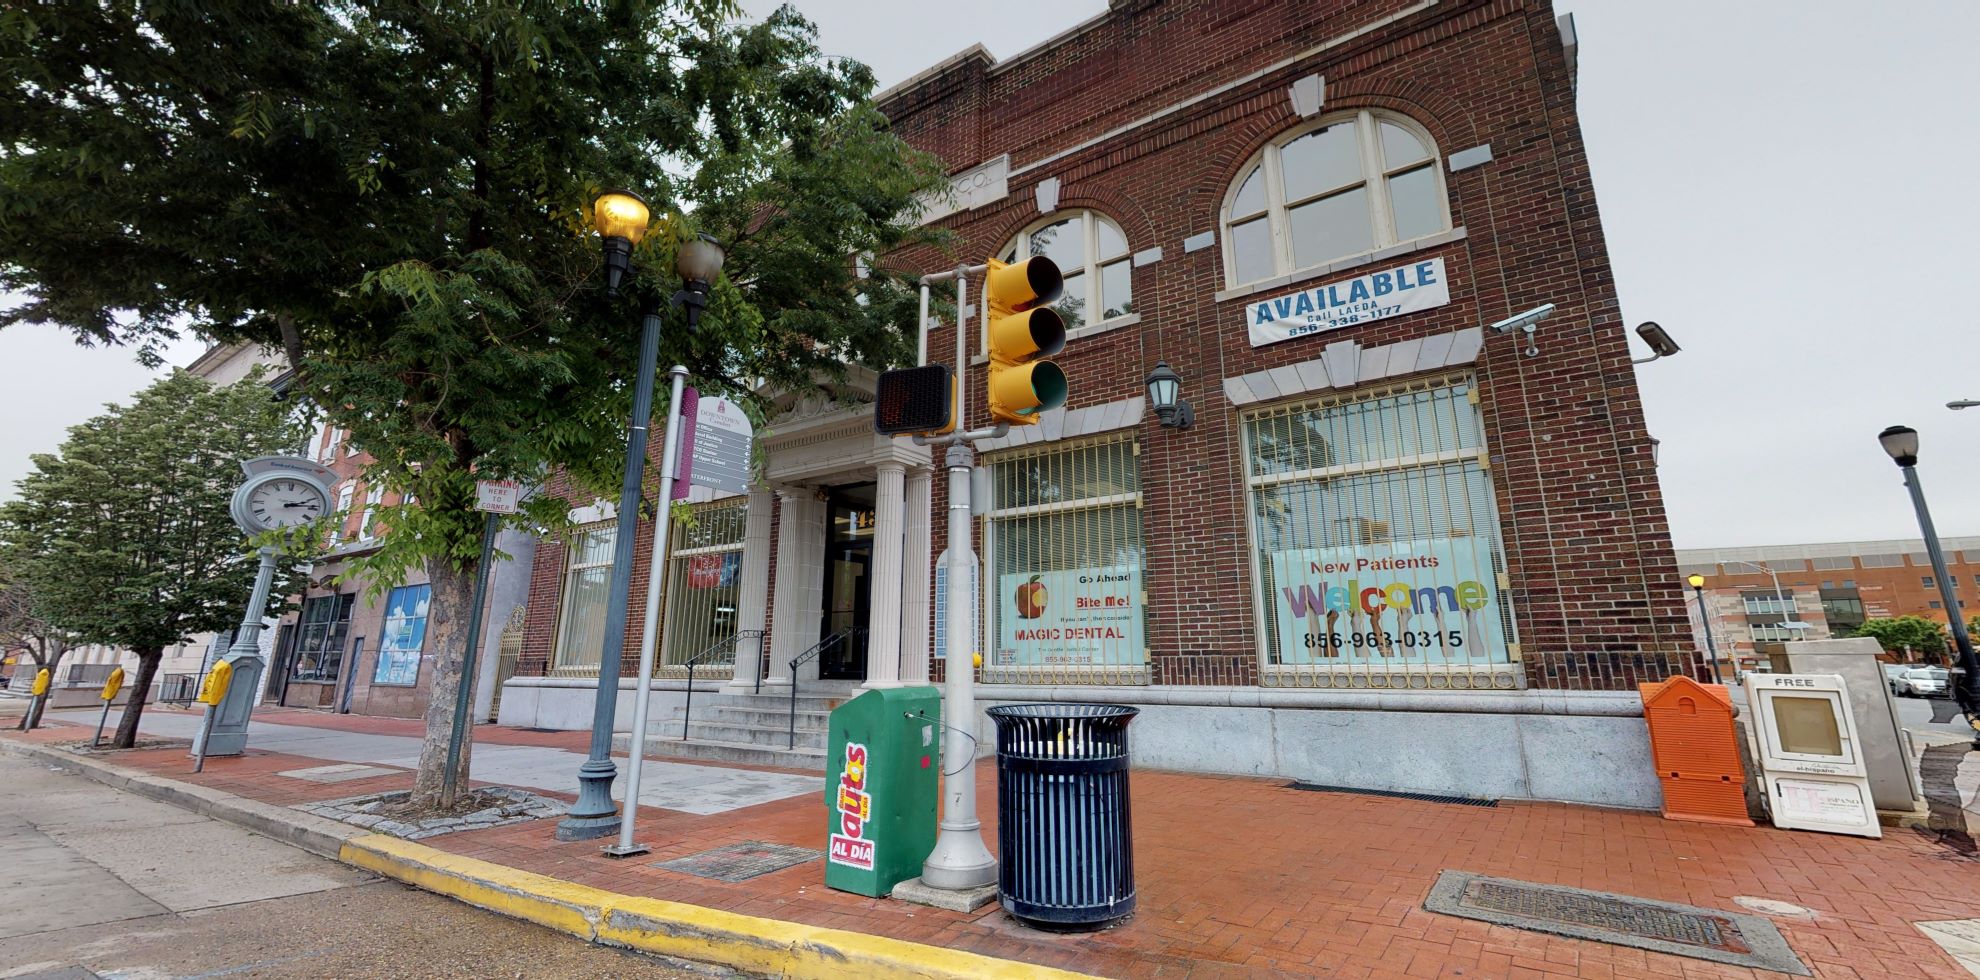 Bank of America financial center with walk-up ATM | 433 Market St, Camden, NJ 08102